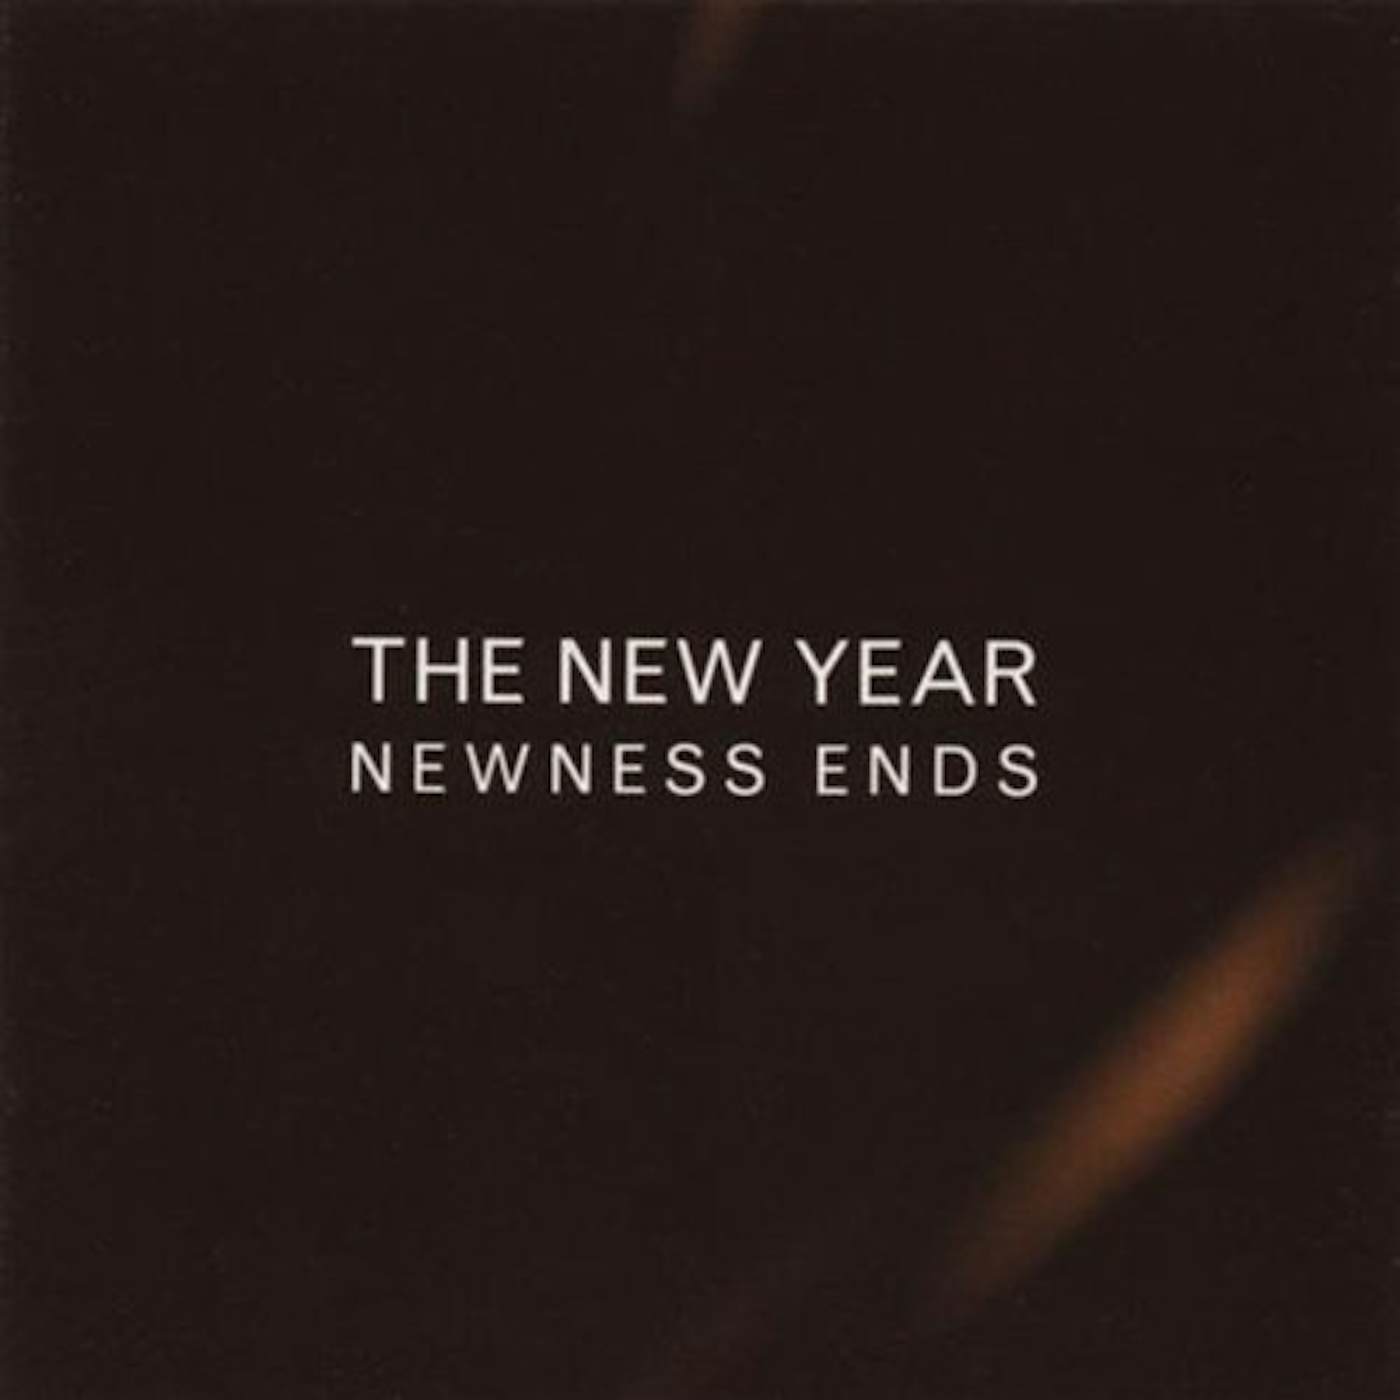 The New Year NEWNESS ENDS CD